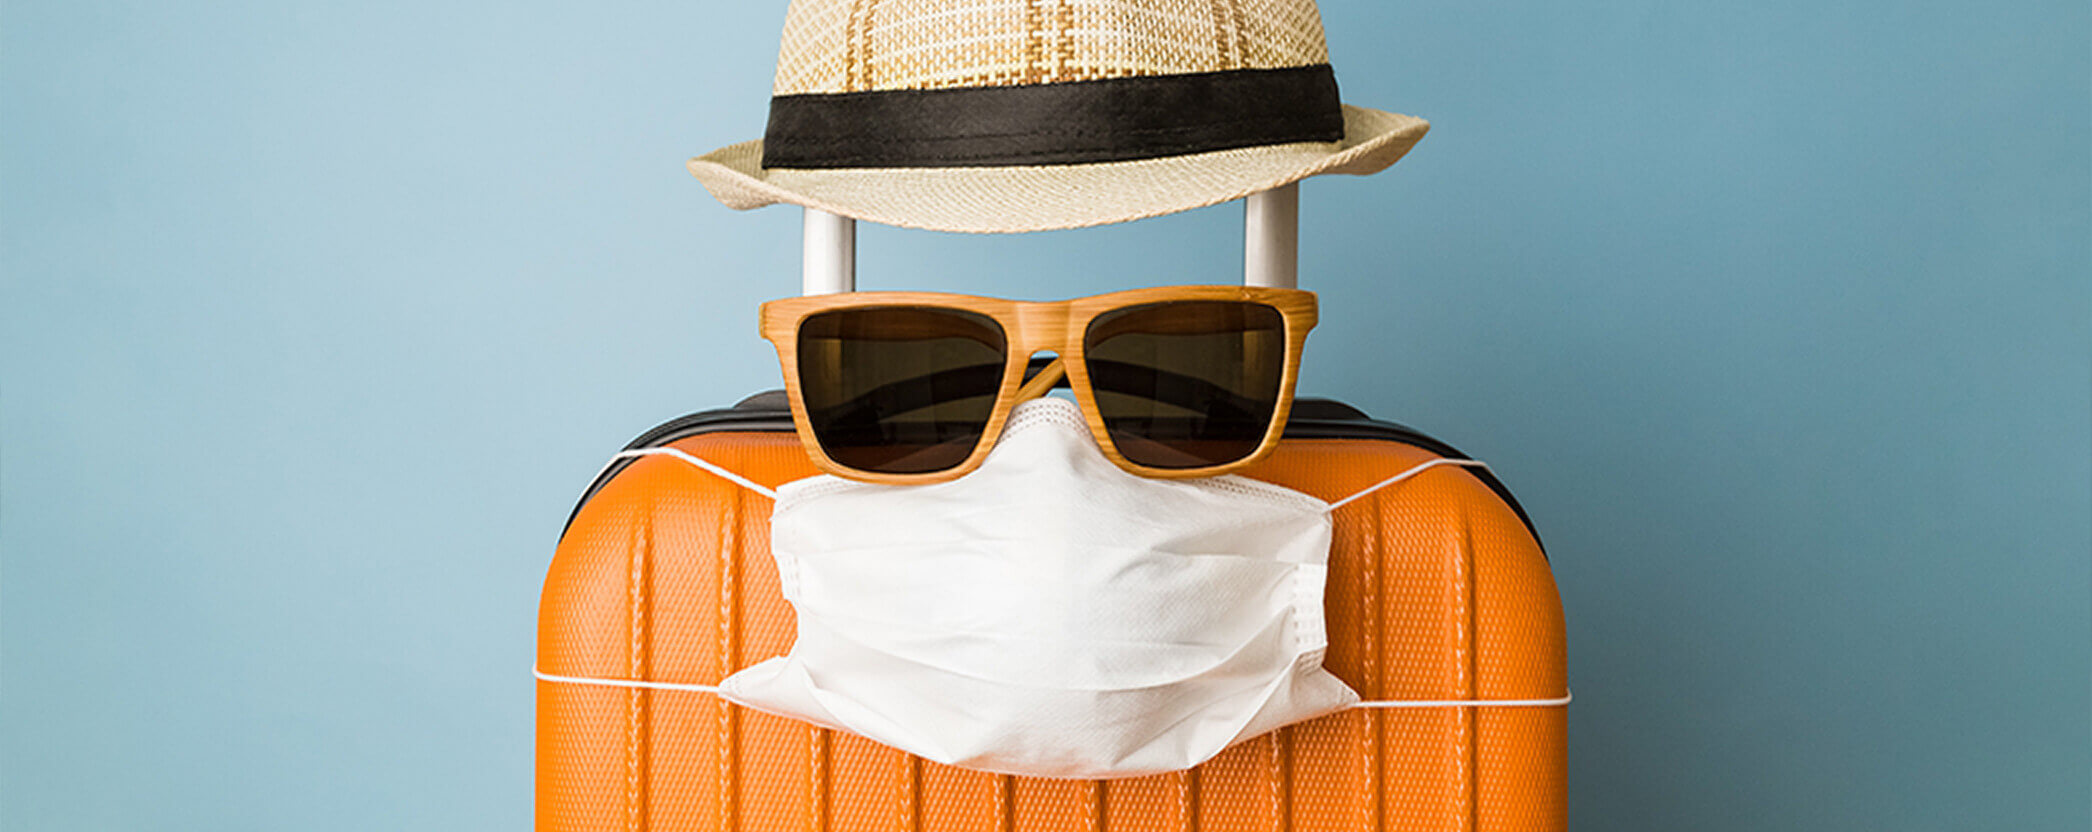 A suitcase with a PPE face mask, sunglasses, and a hat.